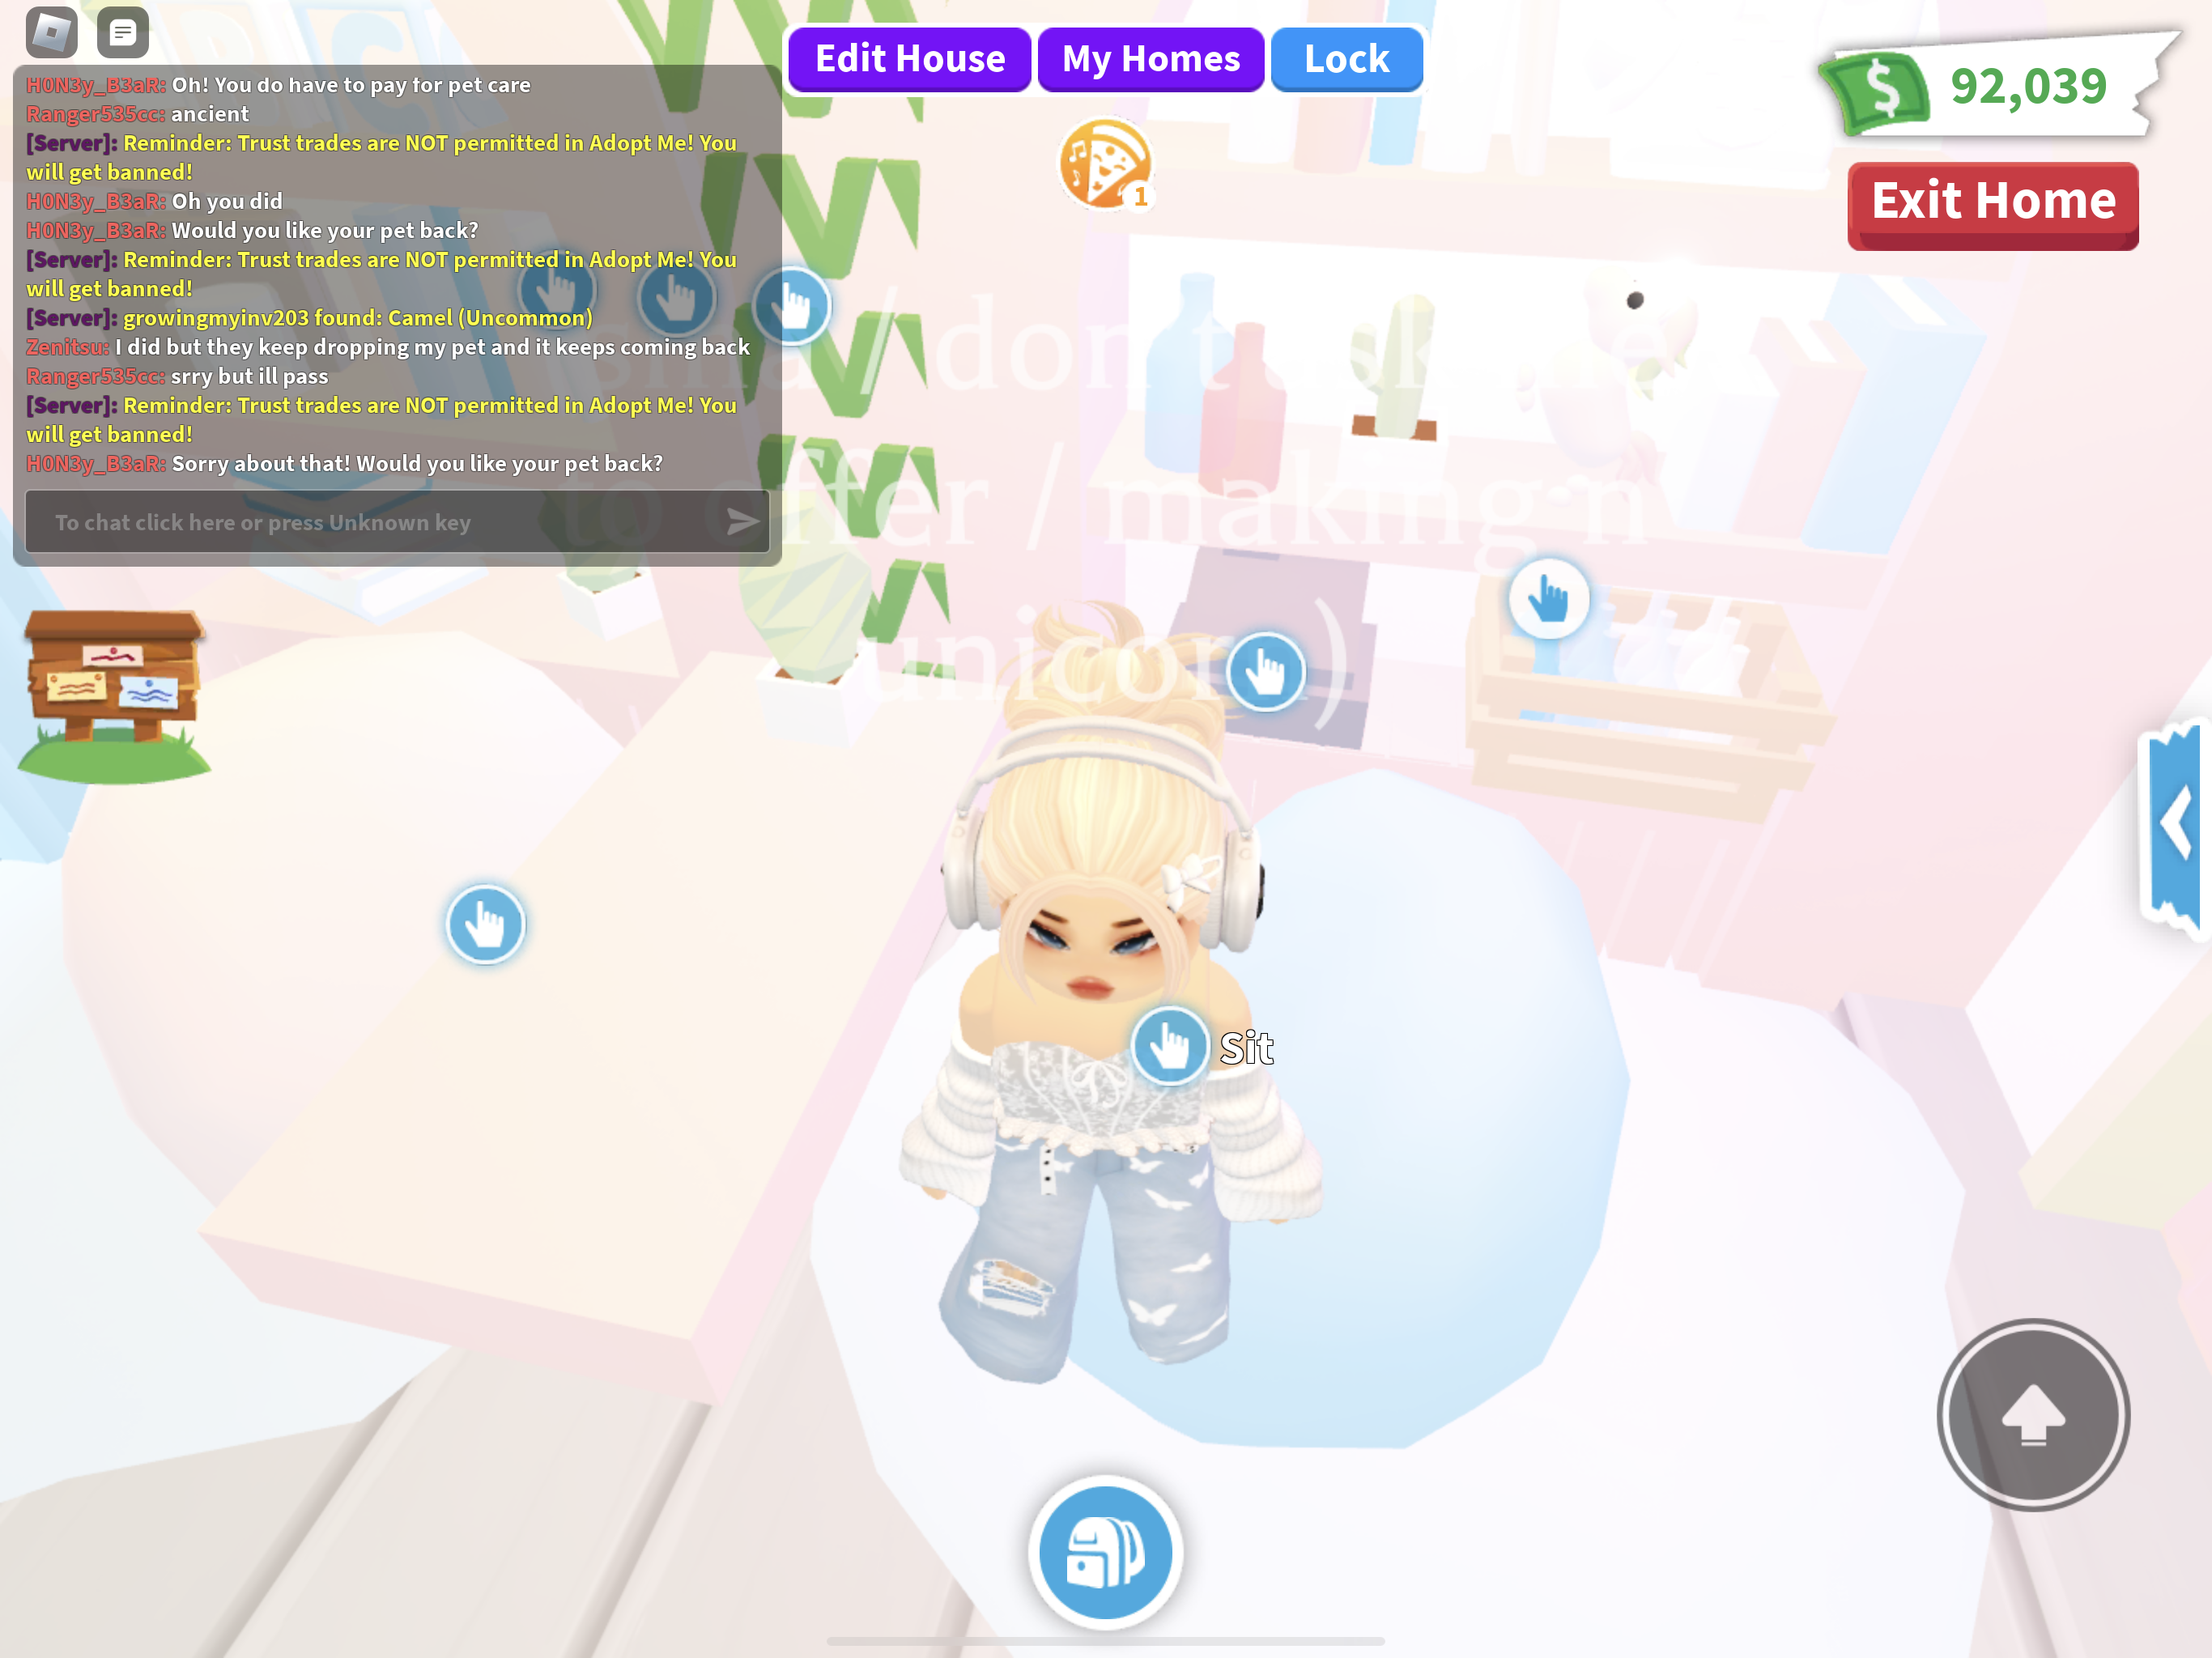 Roblox Adopt me Discord server and trading 